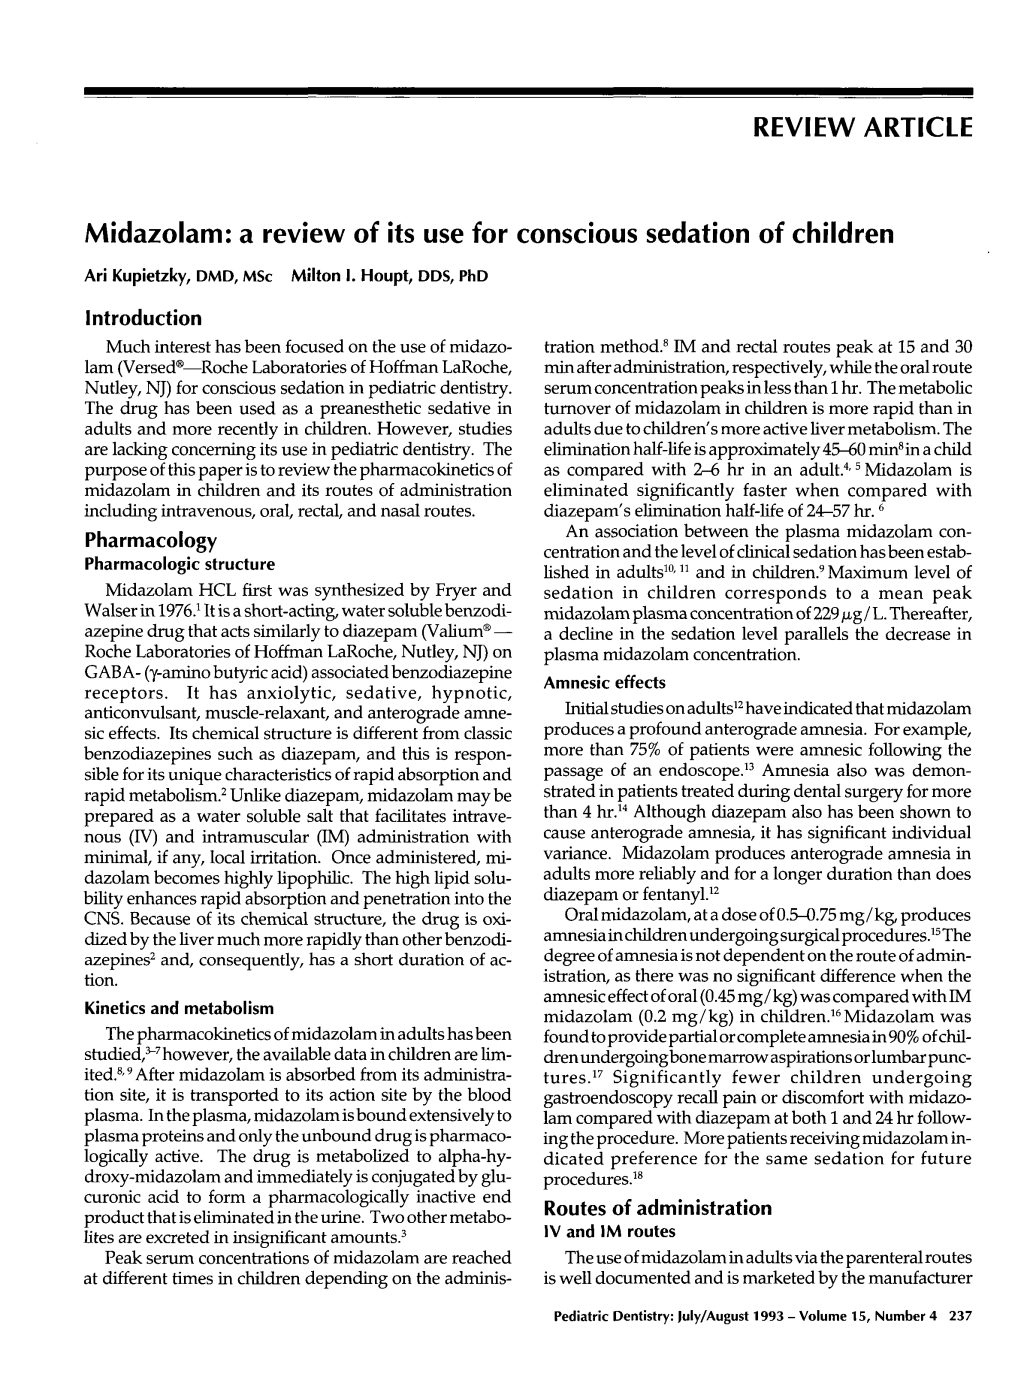 A Review of Its Use for Conscious Sedation of Children